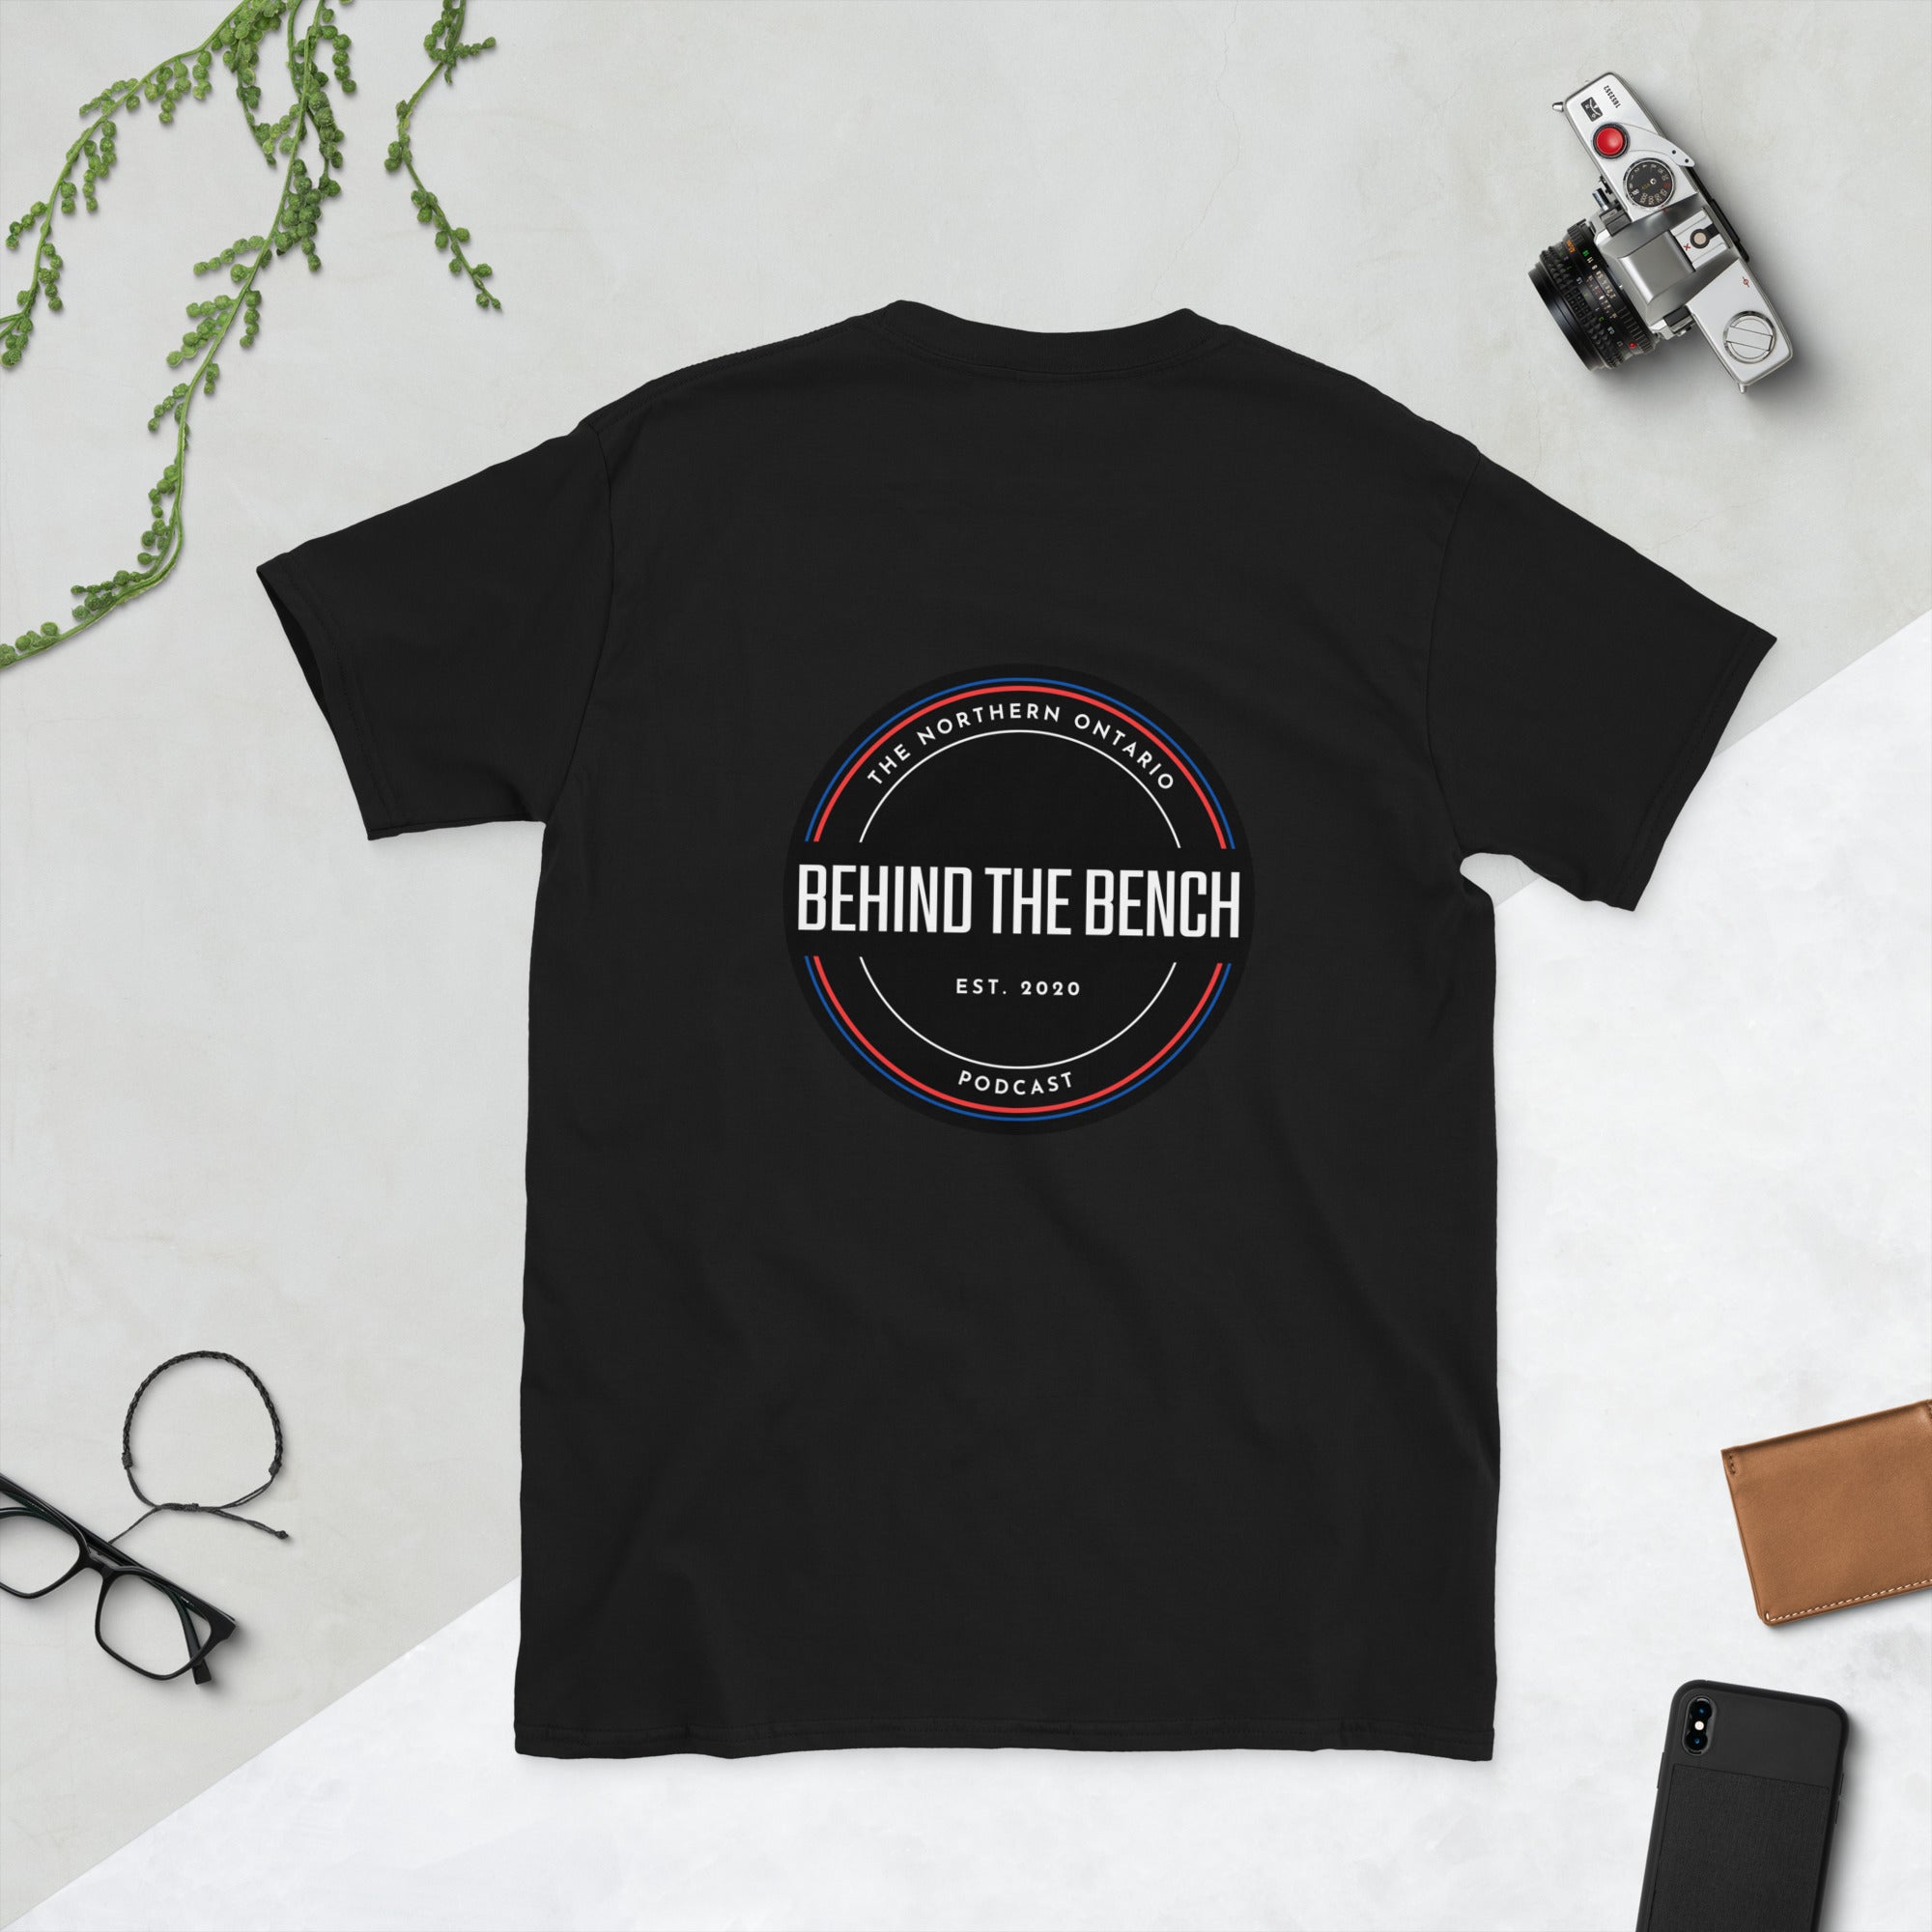 BTB Podcast Three-Year Anniversary Shirt - A Tribute to the North